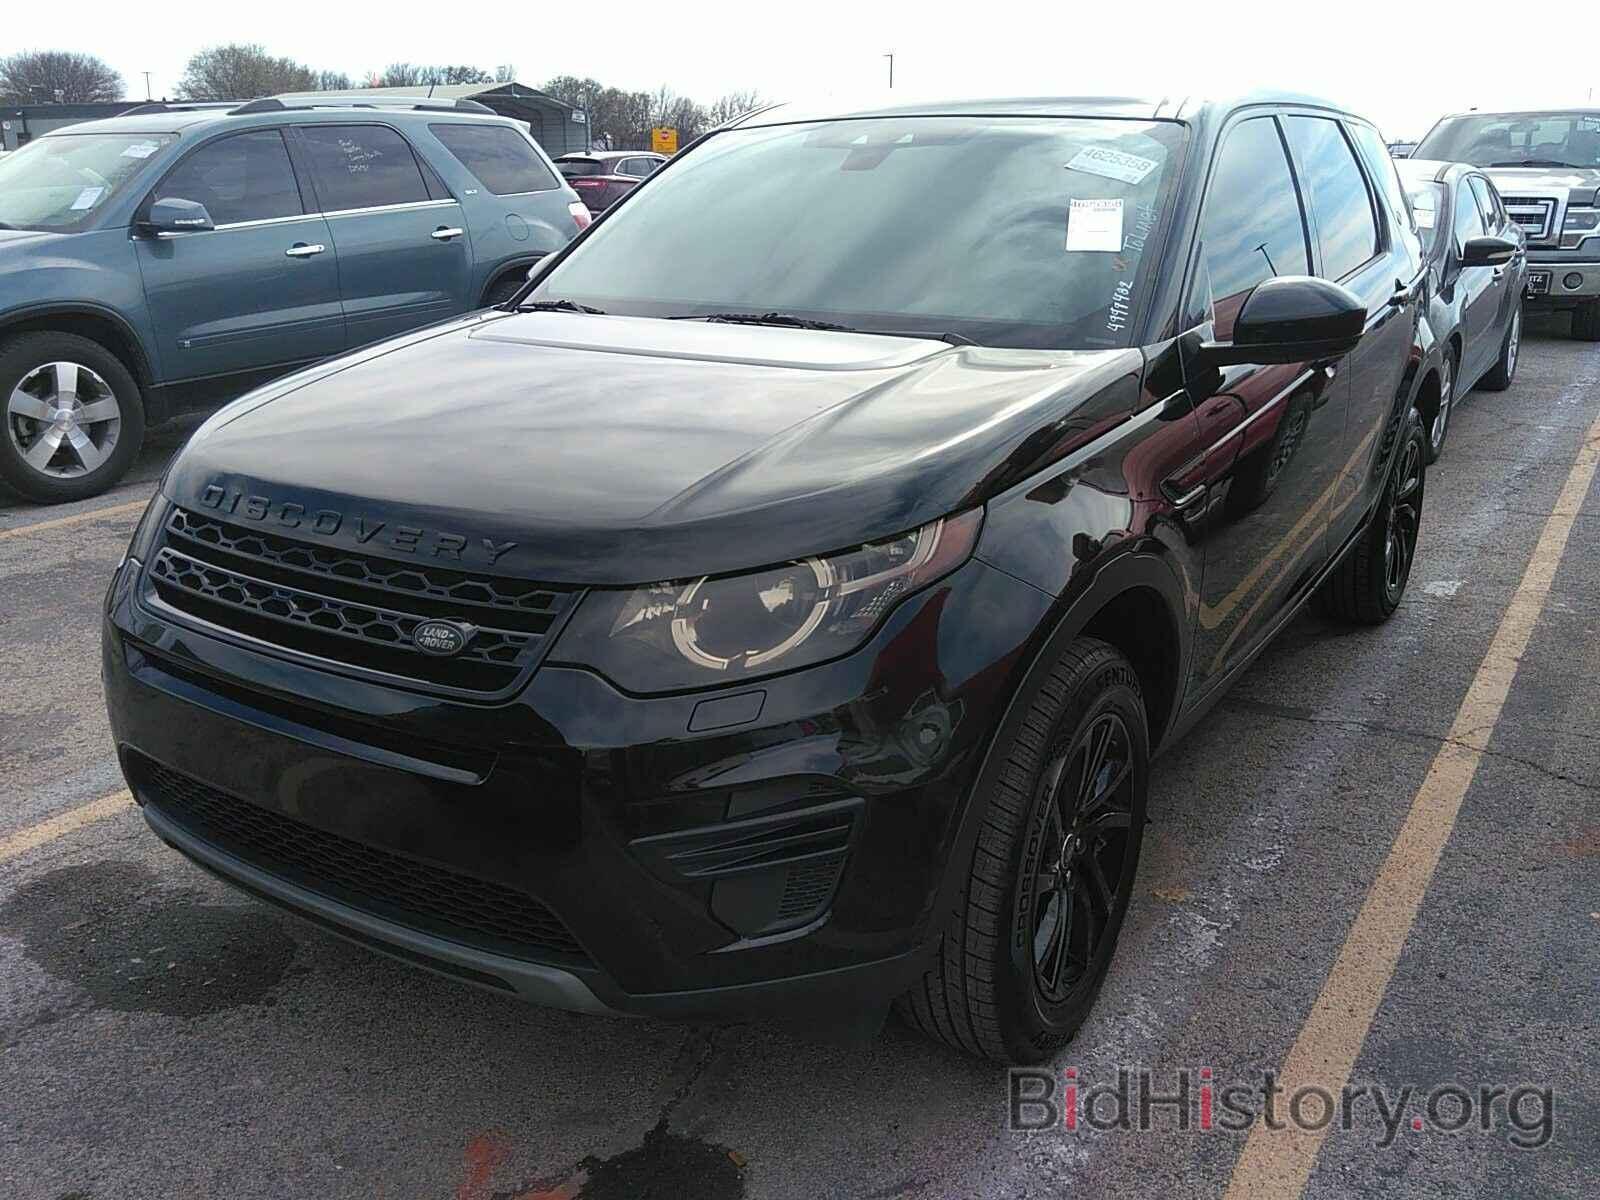 Фотография SALCP2RX9JH730165 - Land Rover Discovery Sport 2018